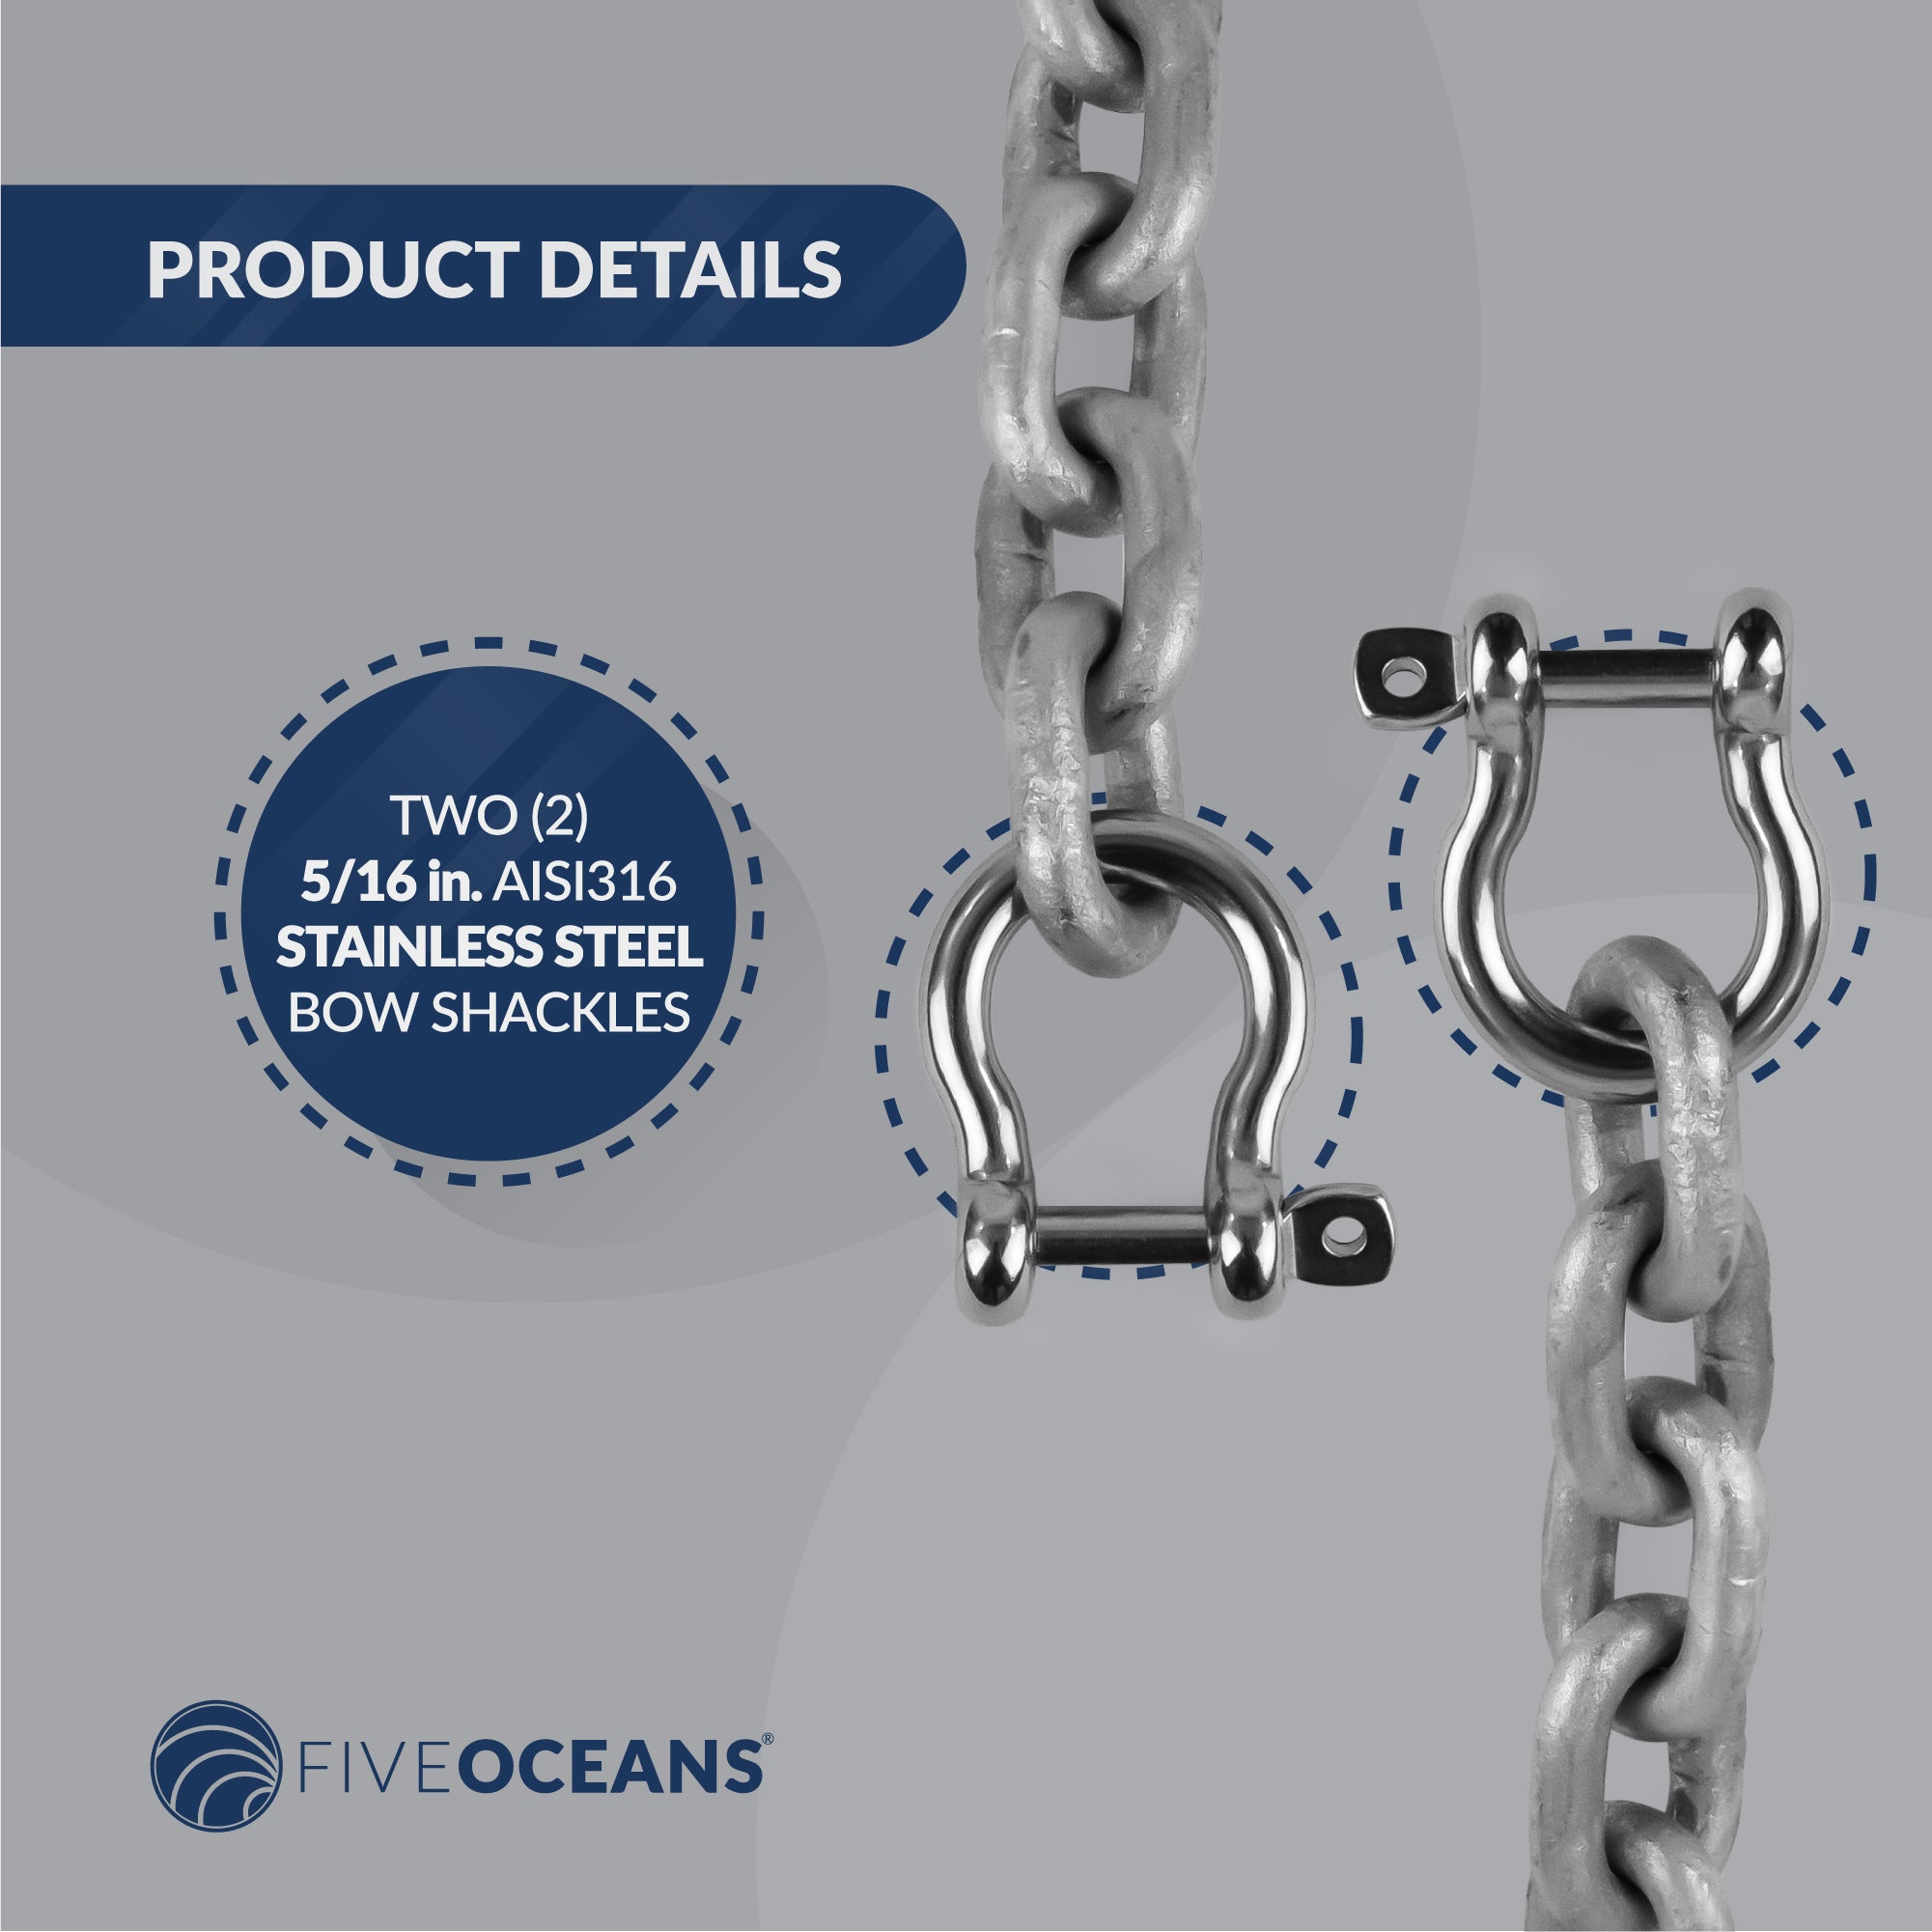 Boat Anchor Lead Chain with Shackles, 5/16" x 15', HTG4 Galvanized Steel - FO4490-G15